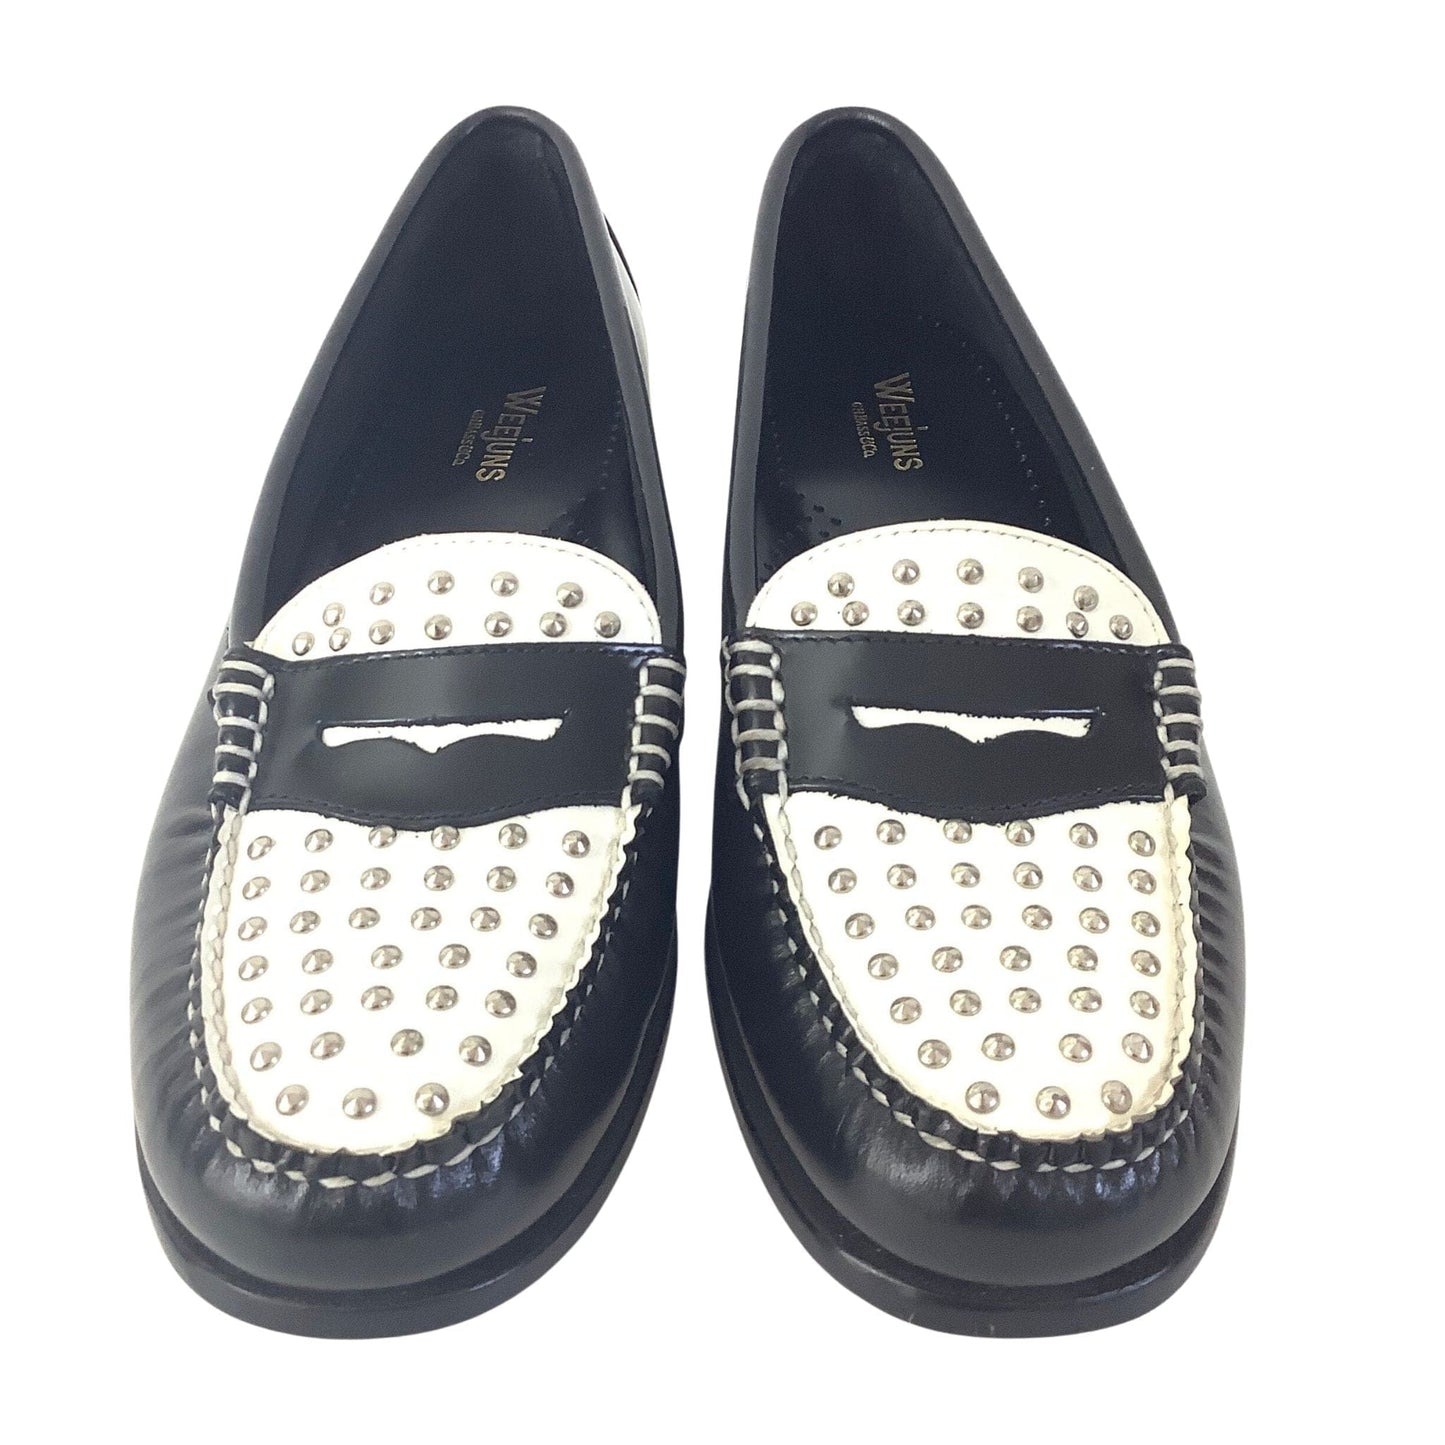 Studded Weejuns Loafers 7.5 / B&W / Y2K - Now